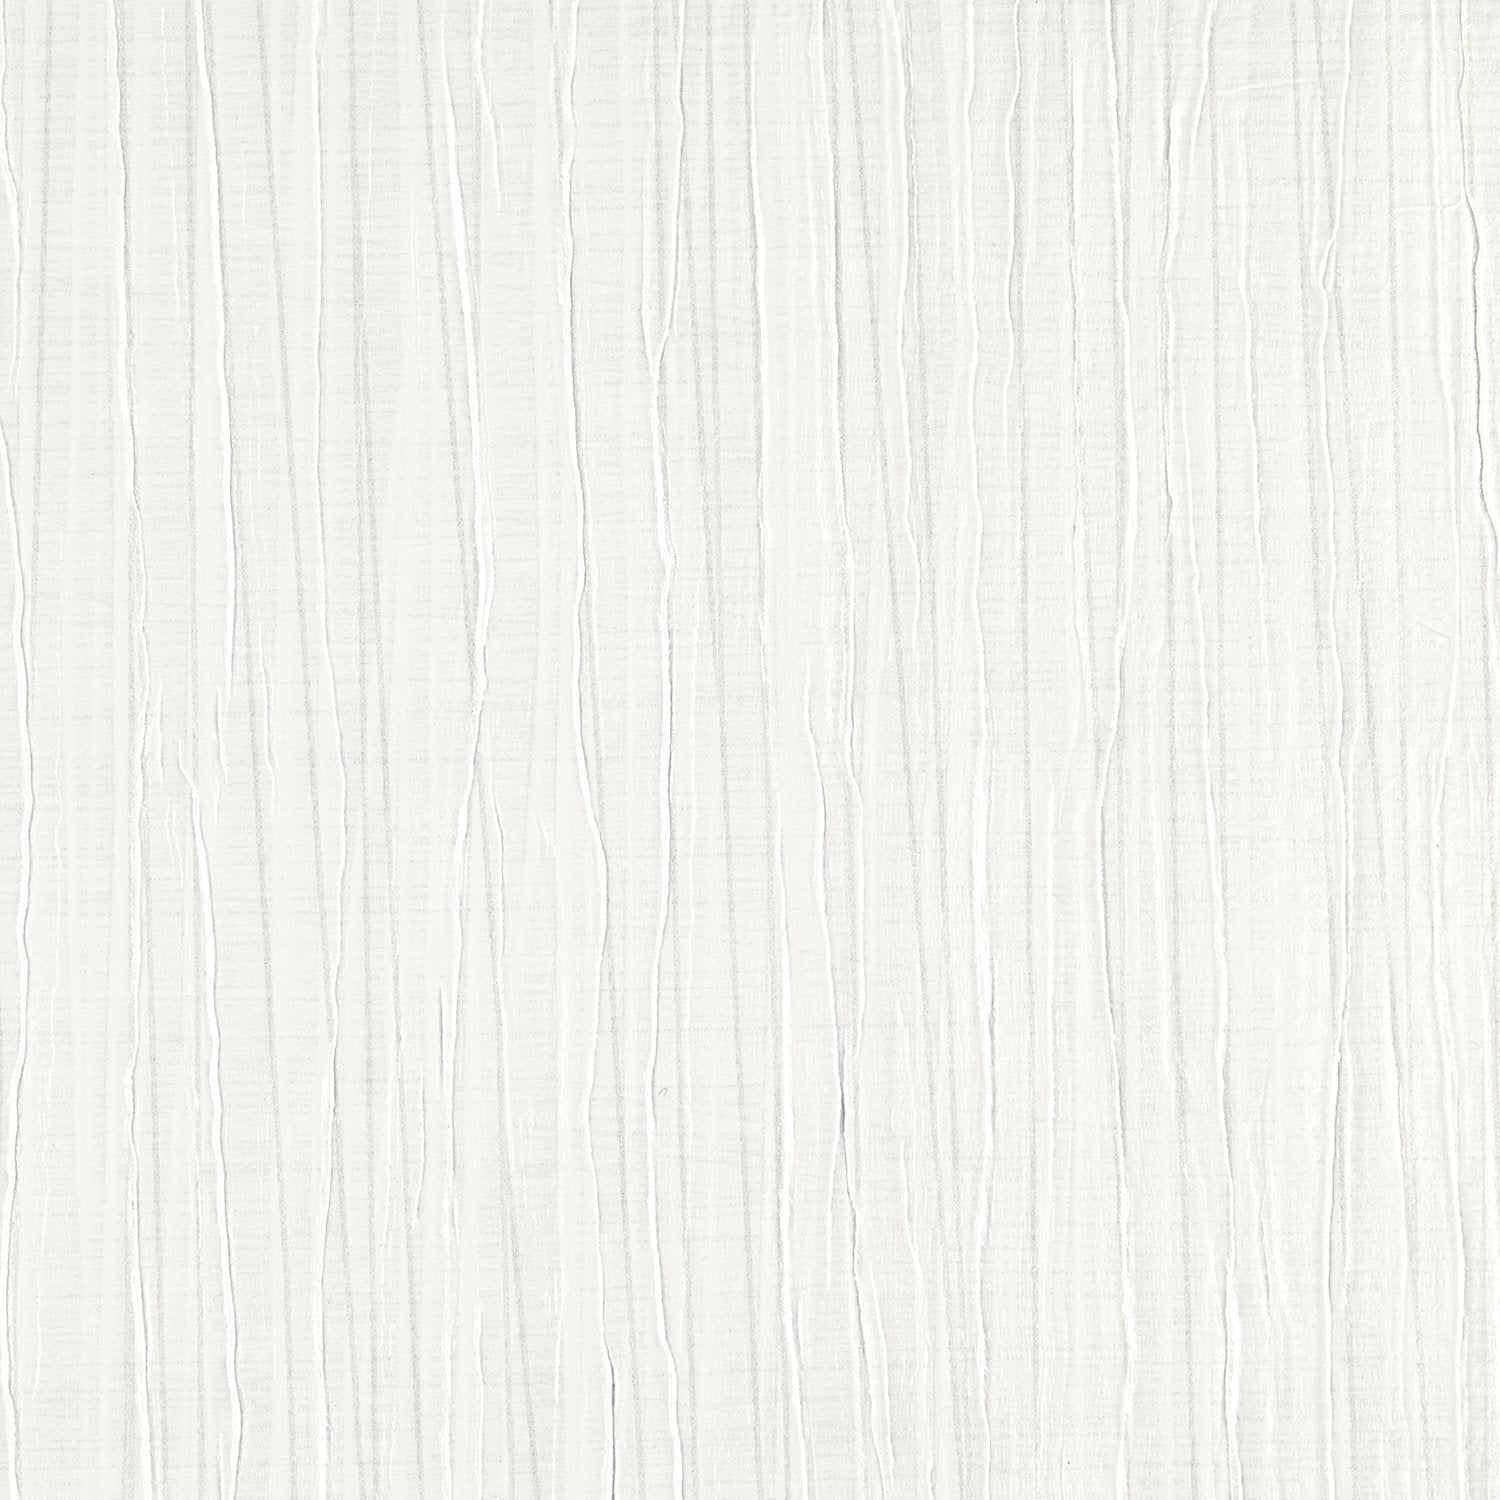 Vogue Pleat - Y47009 - Wallcovering - Vycon - Kube Contract